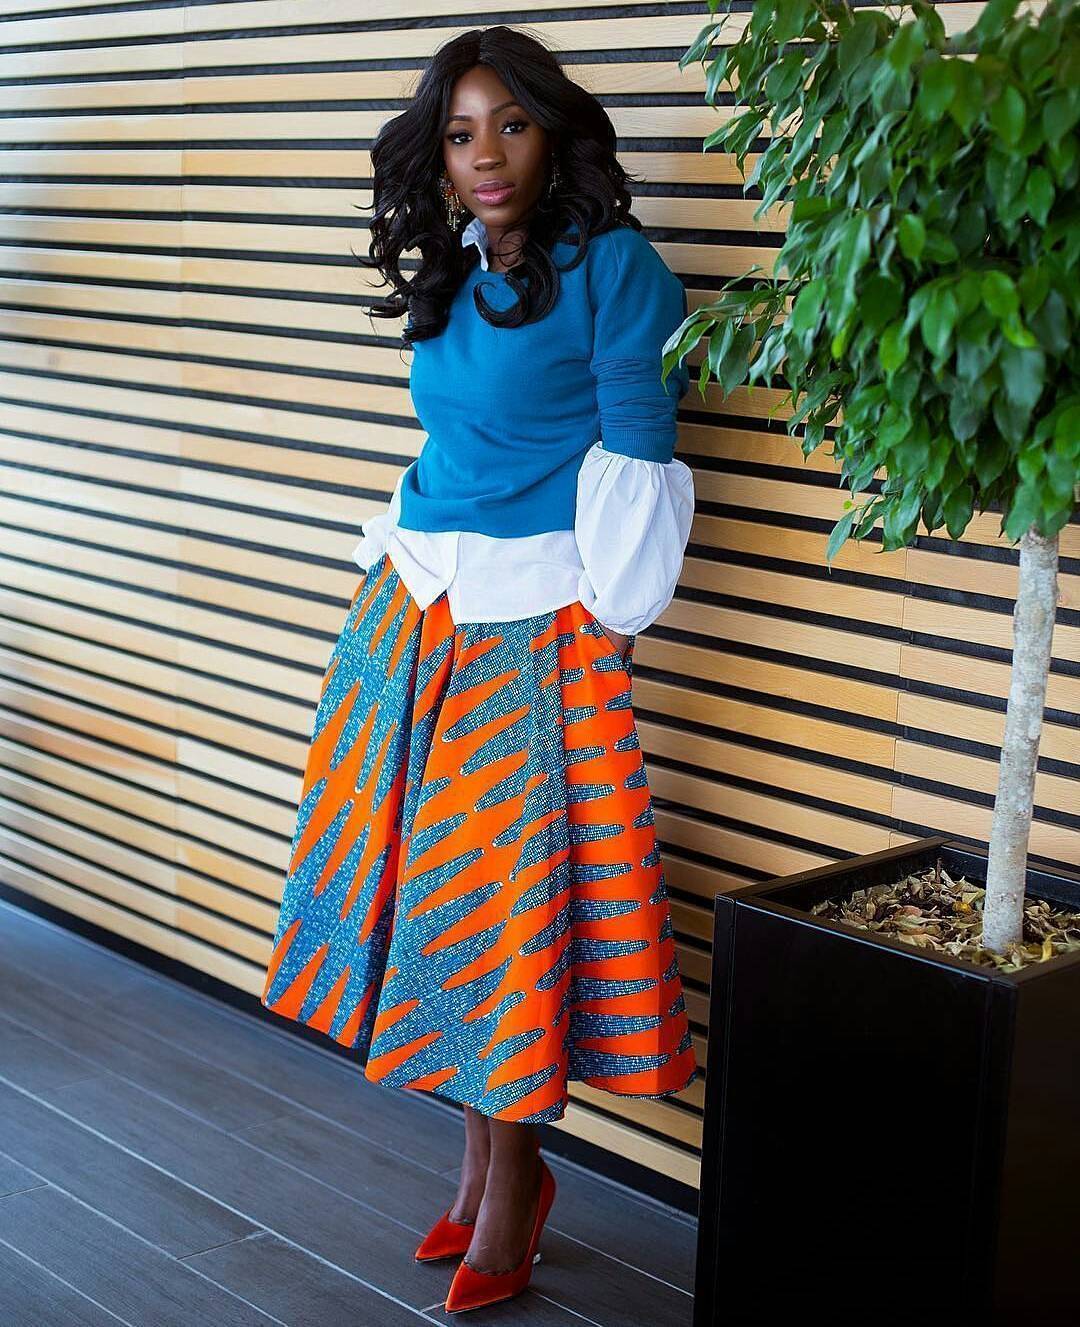 Who Say You Cant Wear These Beautiful Ankara Styles To Work?